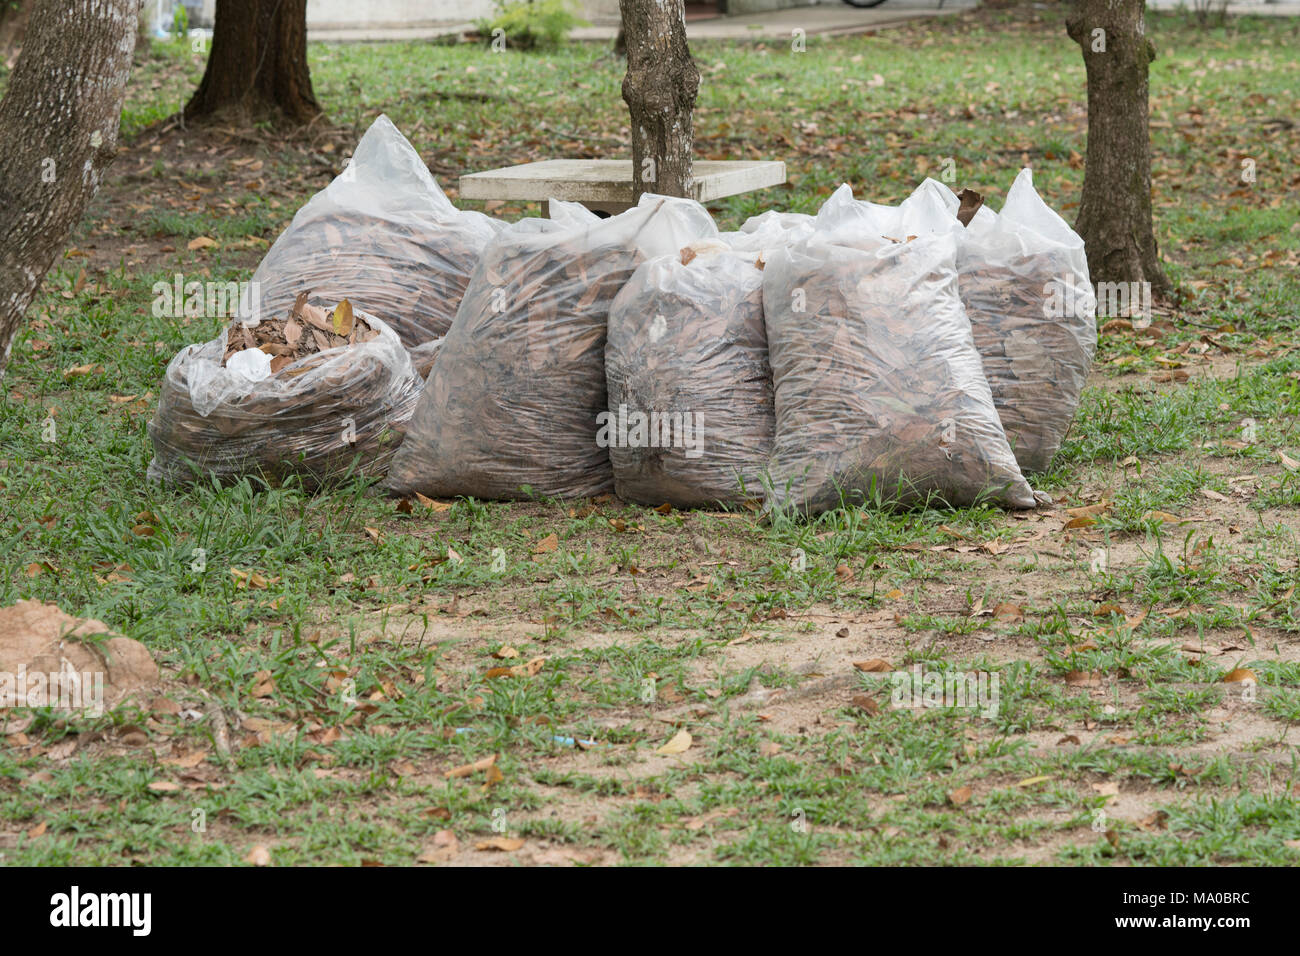 https://c8.alamy.com/comp/MA0BRC/autumn-cleaning-leavespile-of-full-white-garbage-bags-on-the-grass-in-the-parkleaves-in-bag-garbage-MA0BRC.jpg